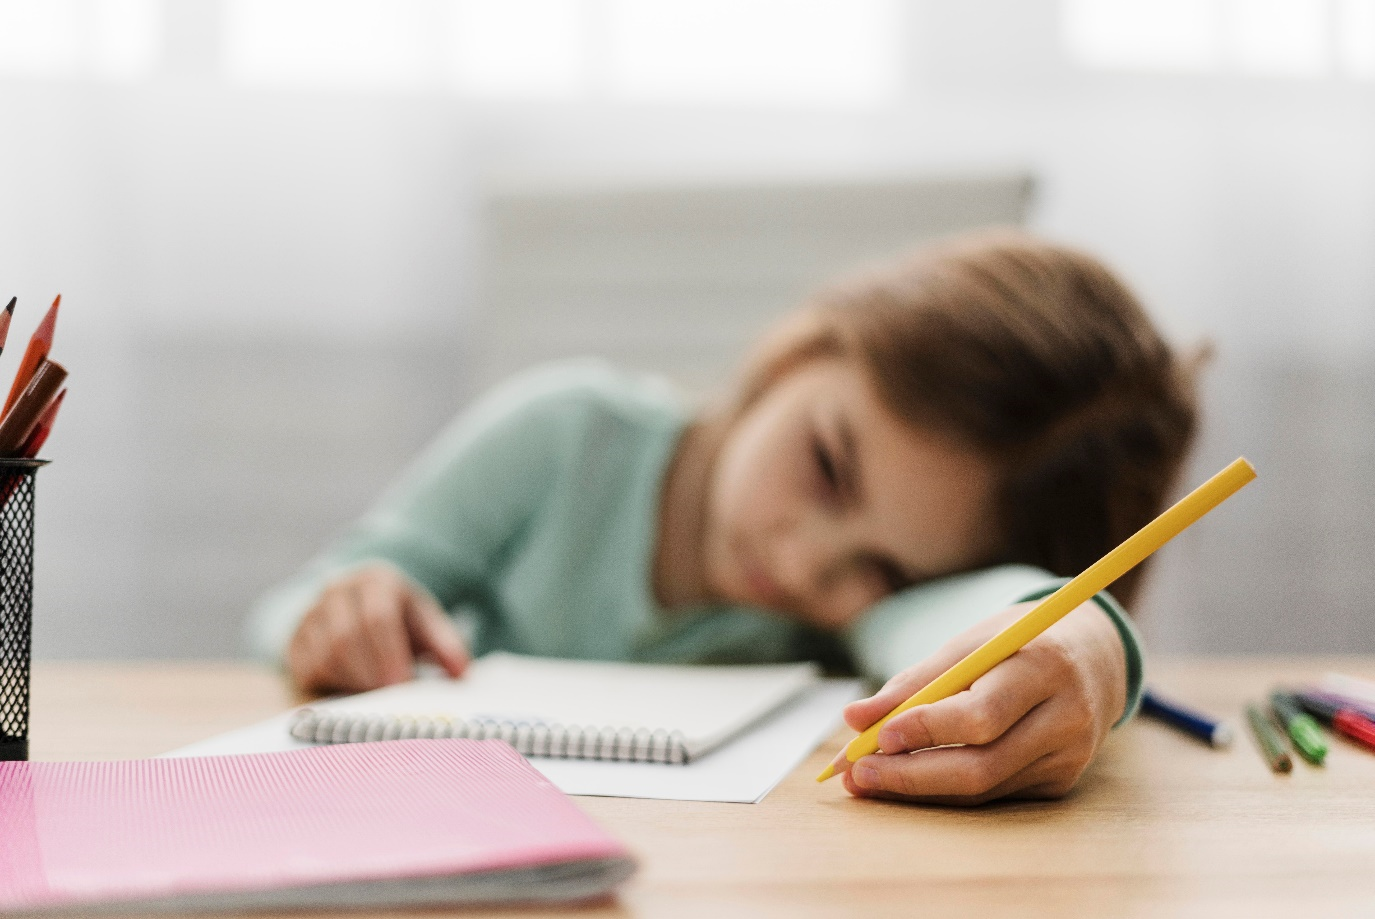 Top 3 tips to ensure kid's progression without exams or tests